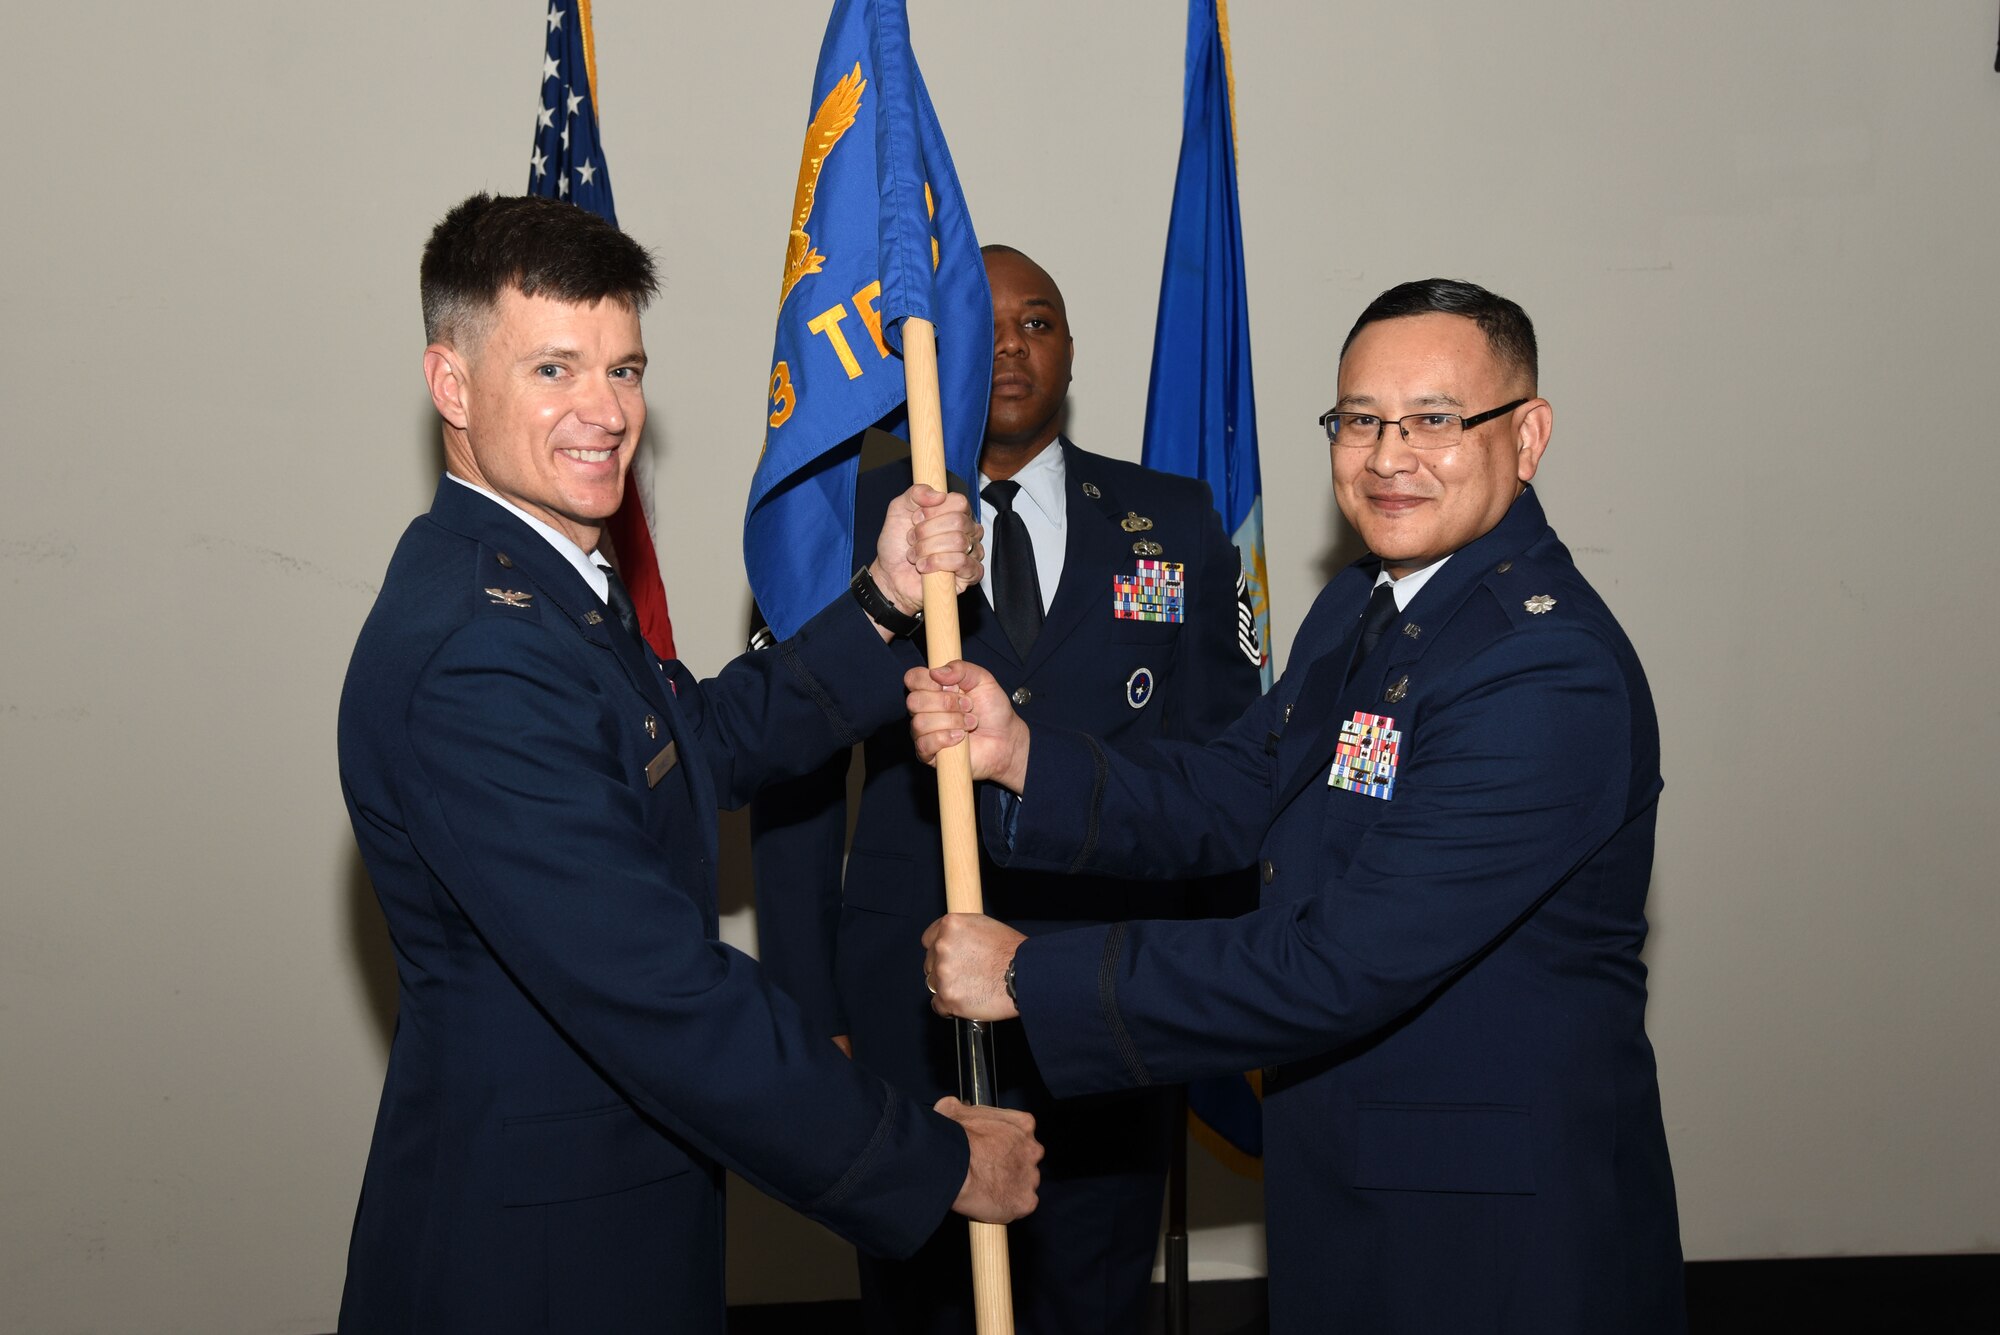 U.S. Air Force Col. Thomas Coakley, 17th Training Group commander, passes the 313th Training Squadron guideon to Lt. Col. David Sarabia, 313th TRS commander, during the 313th TRS Assumption of Command at the Event Center on Goodfellow Air Force Base, Texas, Oct. 24, 2018. As the 313th TRS commander, Sarabia is responsible for providing world-class international, mission-qualification, as well as intermediate and advanced intelligence, surveillance and reconnaissance training to develop and inspire professionals for the Department of Defense and our international partners. (U.S. Air Force photo by Staff Sgt. Joshua Edwards/Released)